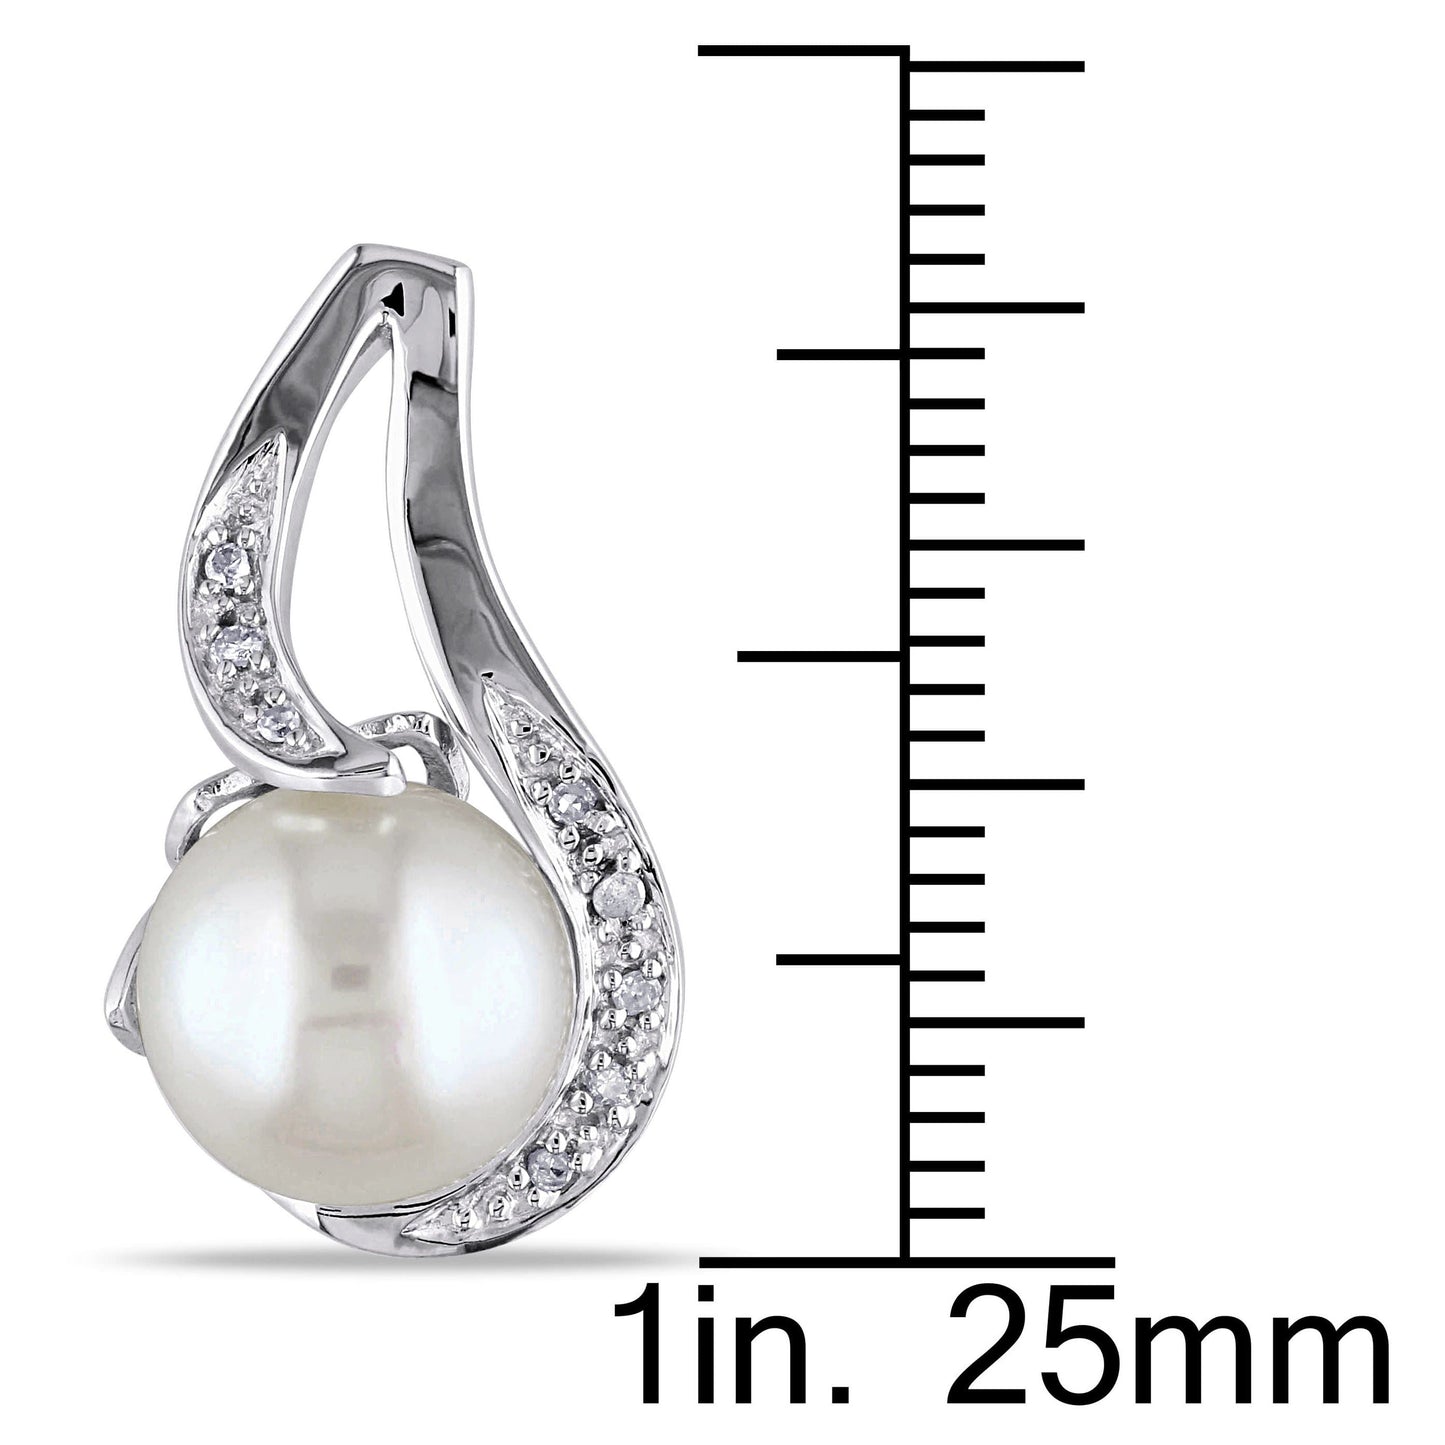 Michiko 9-9.5mm Cultured Freshwater Pearl Earrings with Diamond Accents